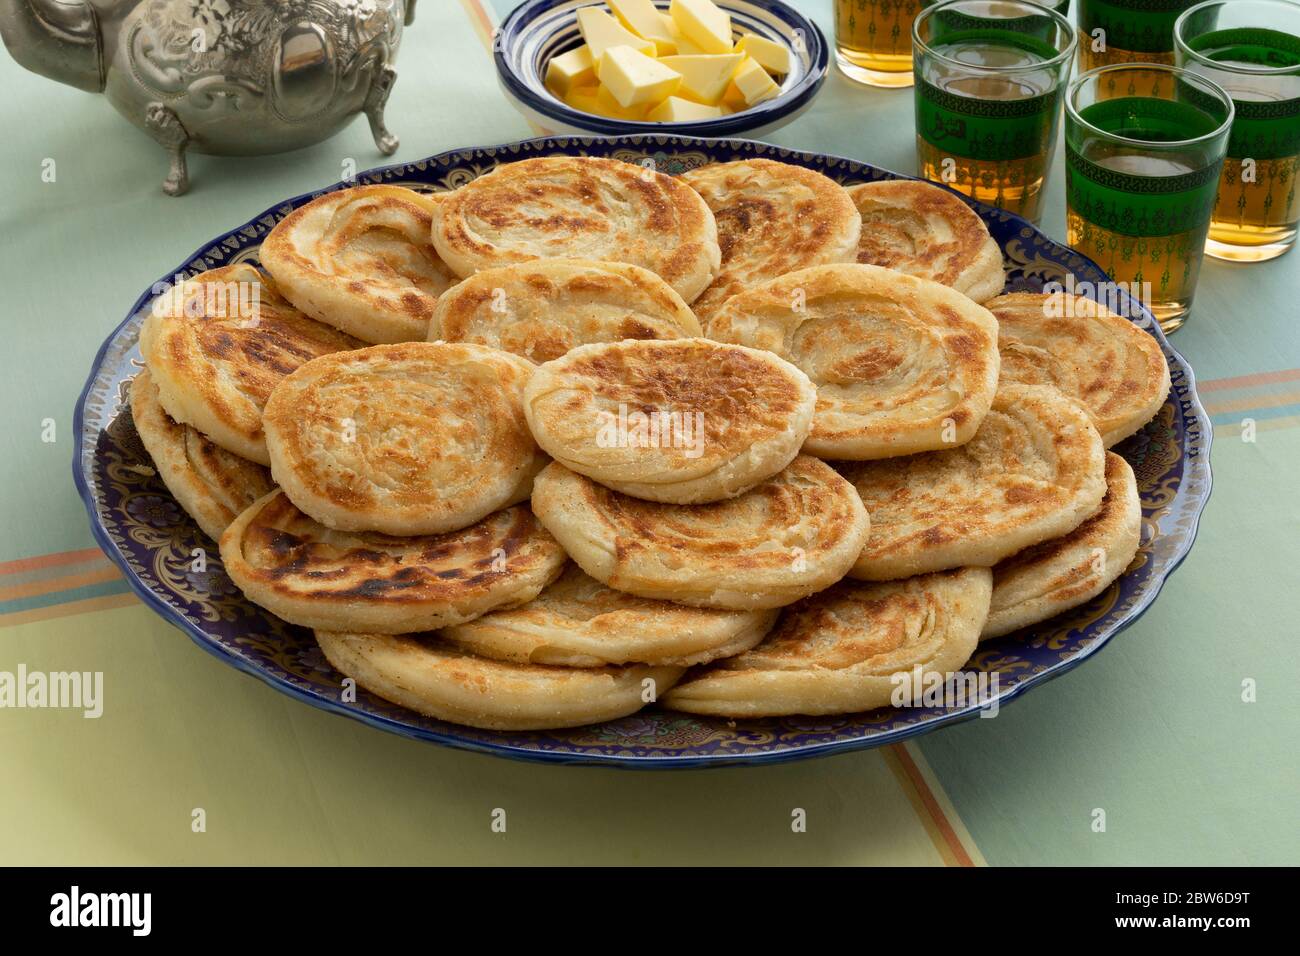 Homemage fresh baked meloui, Moroccan pancakes on a plate with butter and tea for Eid al-Fitr Stock Photo